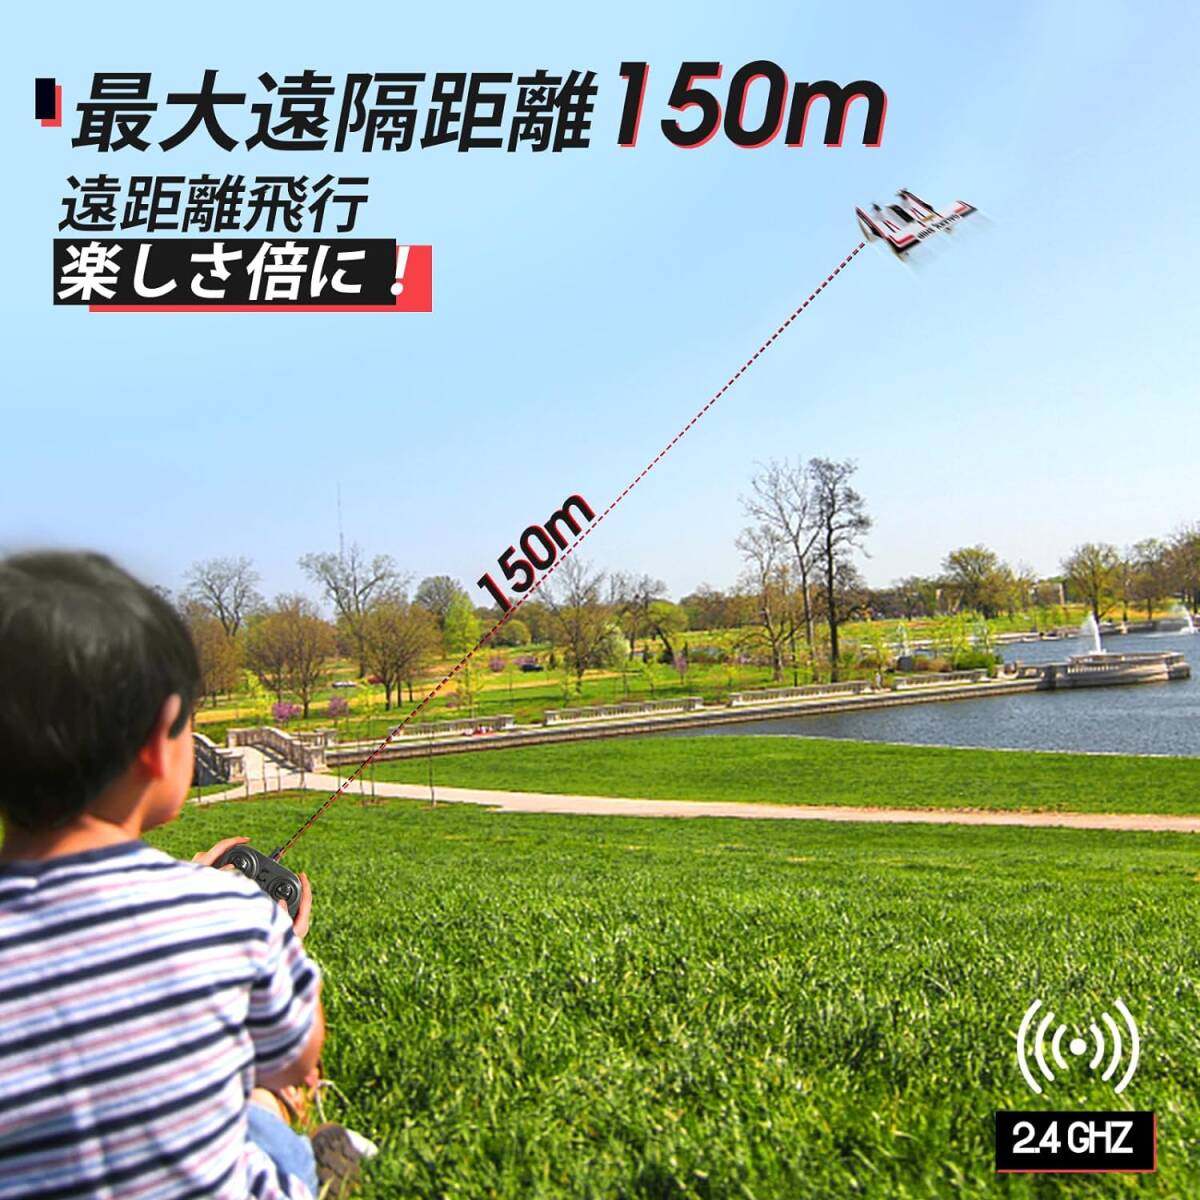  radio controlled airplane water land empty three for 100g under 150M operation distance 2 -step Speed switch low electro- amount alarm durability Japanese manual .. certification settled 